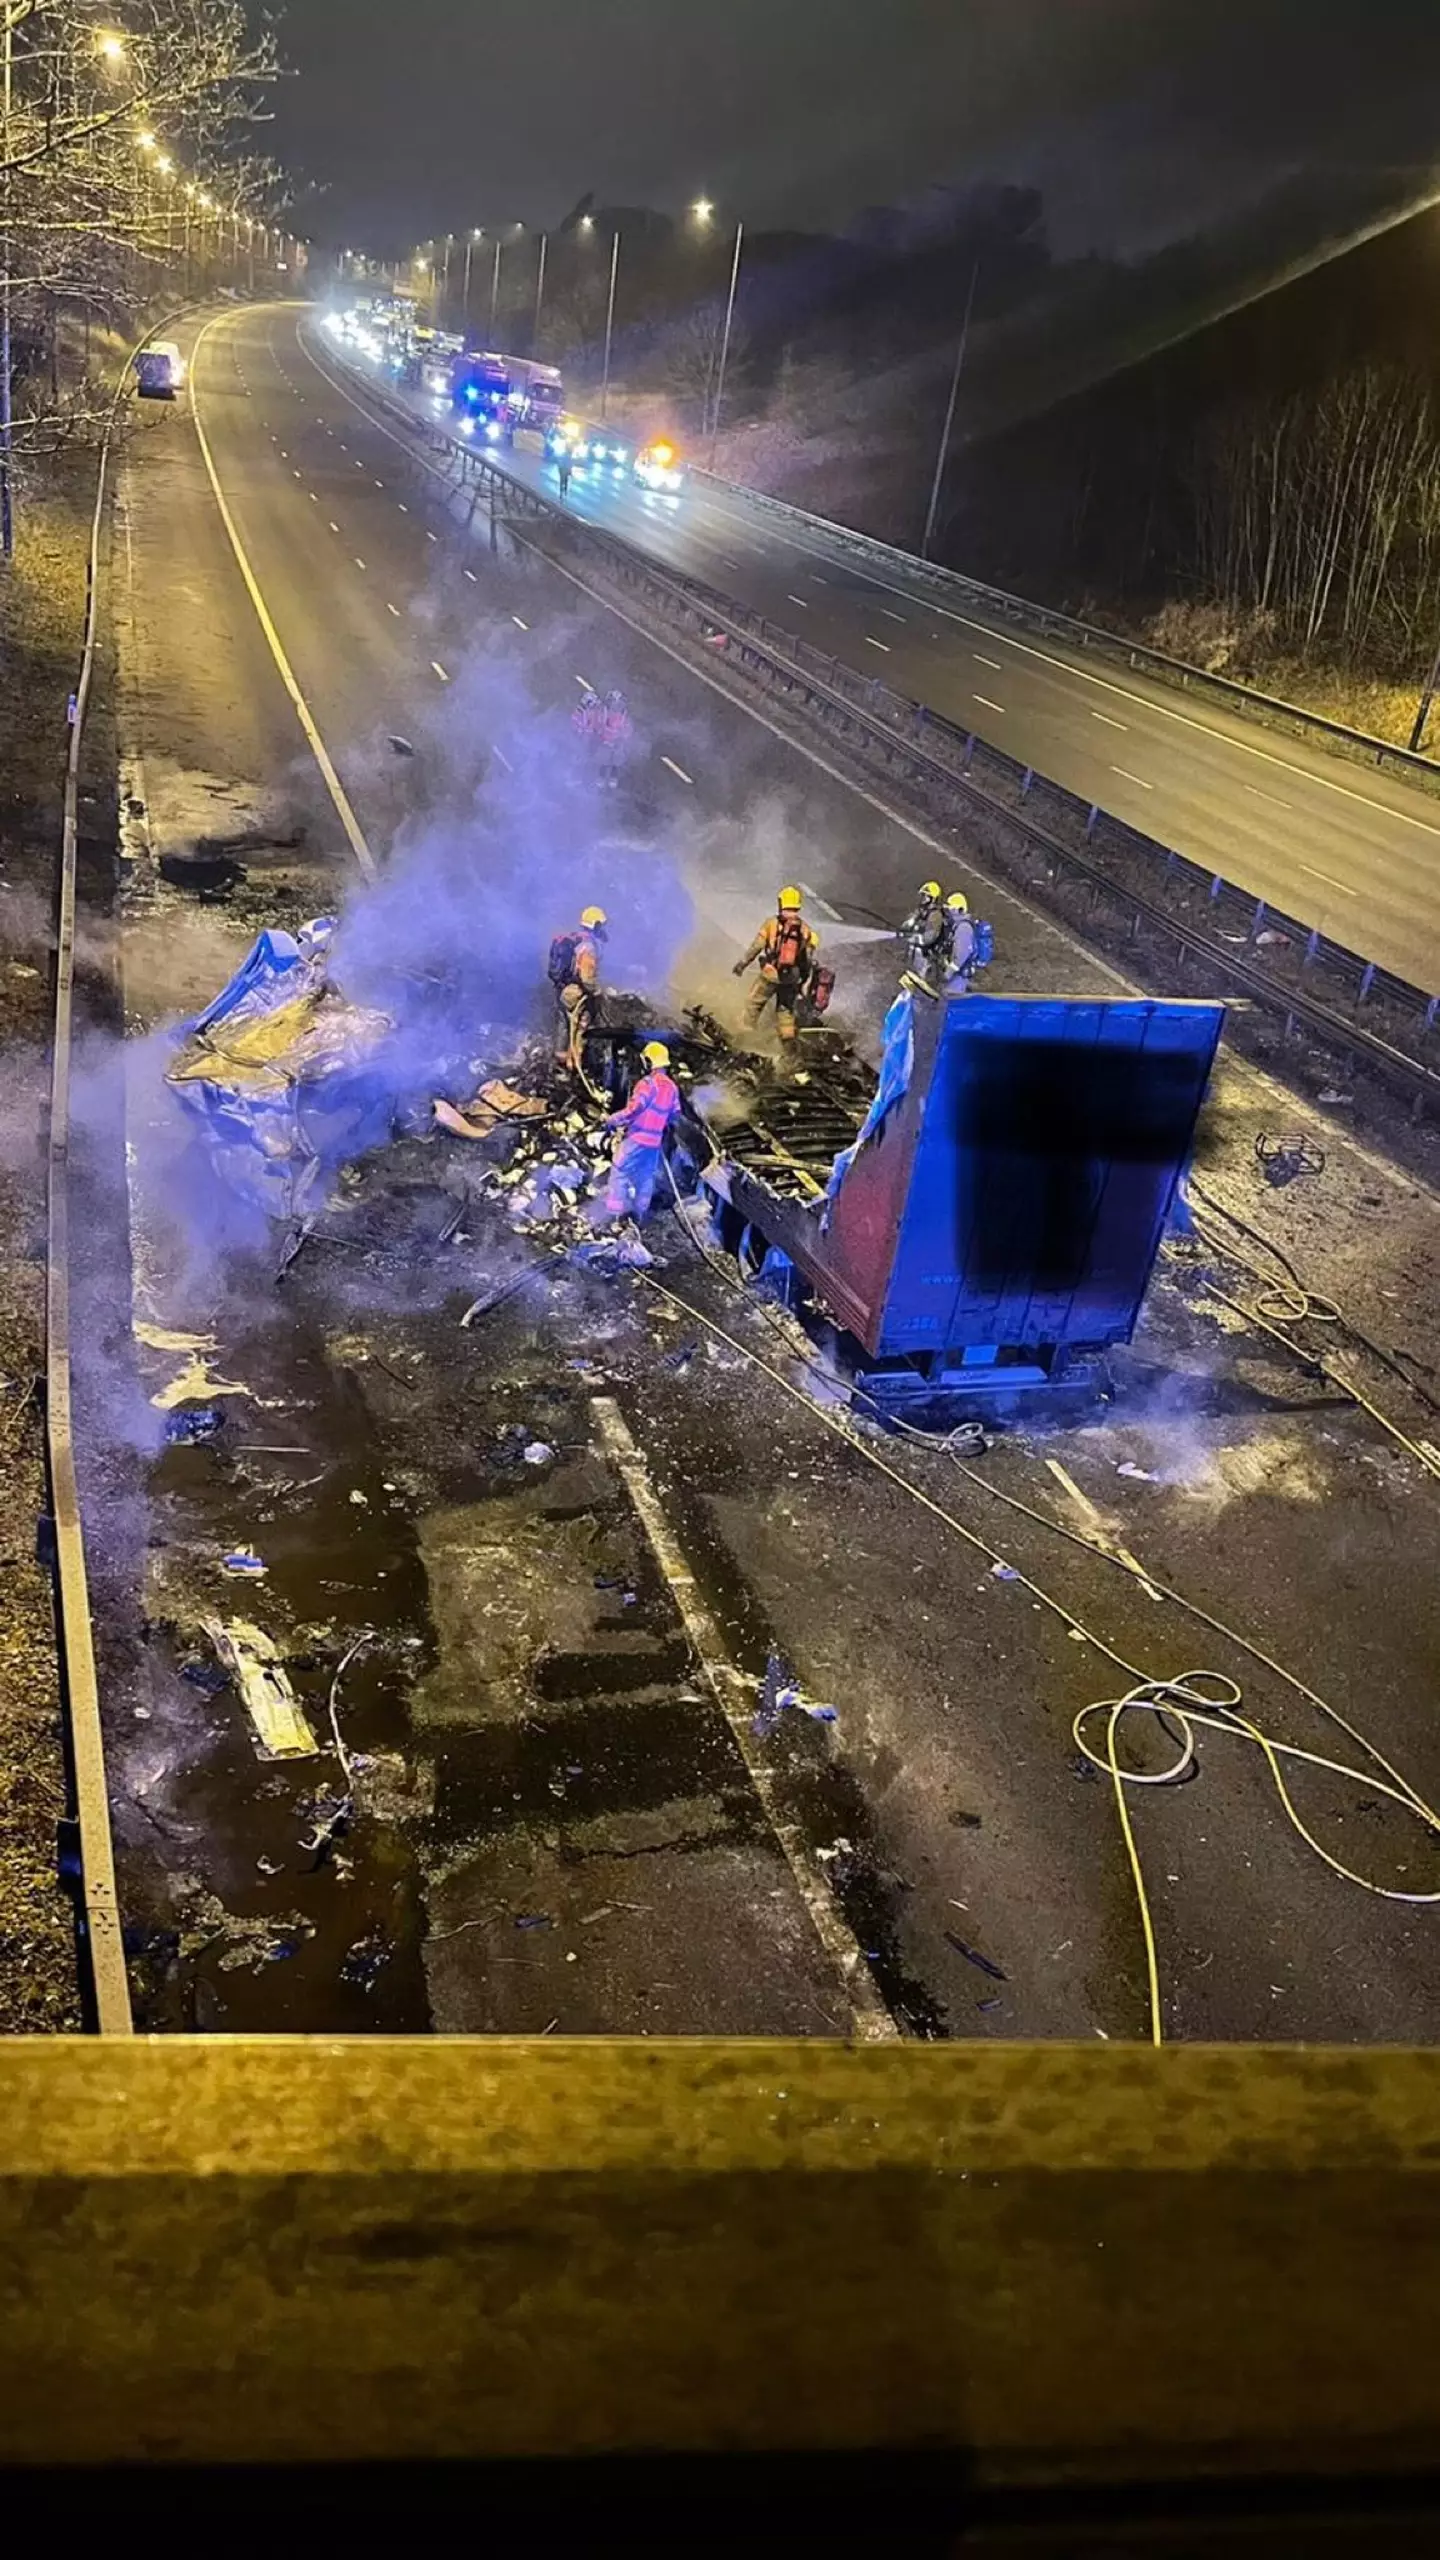 Lorry catches fire on M6 (@LancsRoadPolice/Twitter)